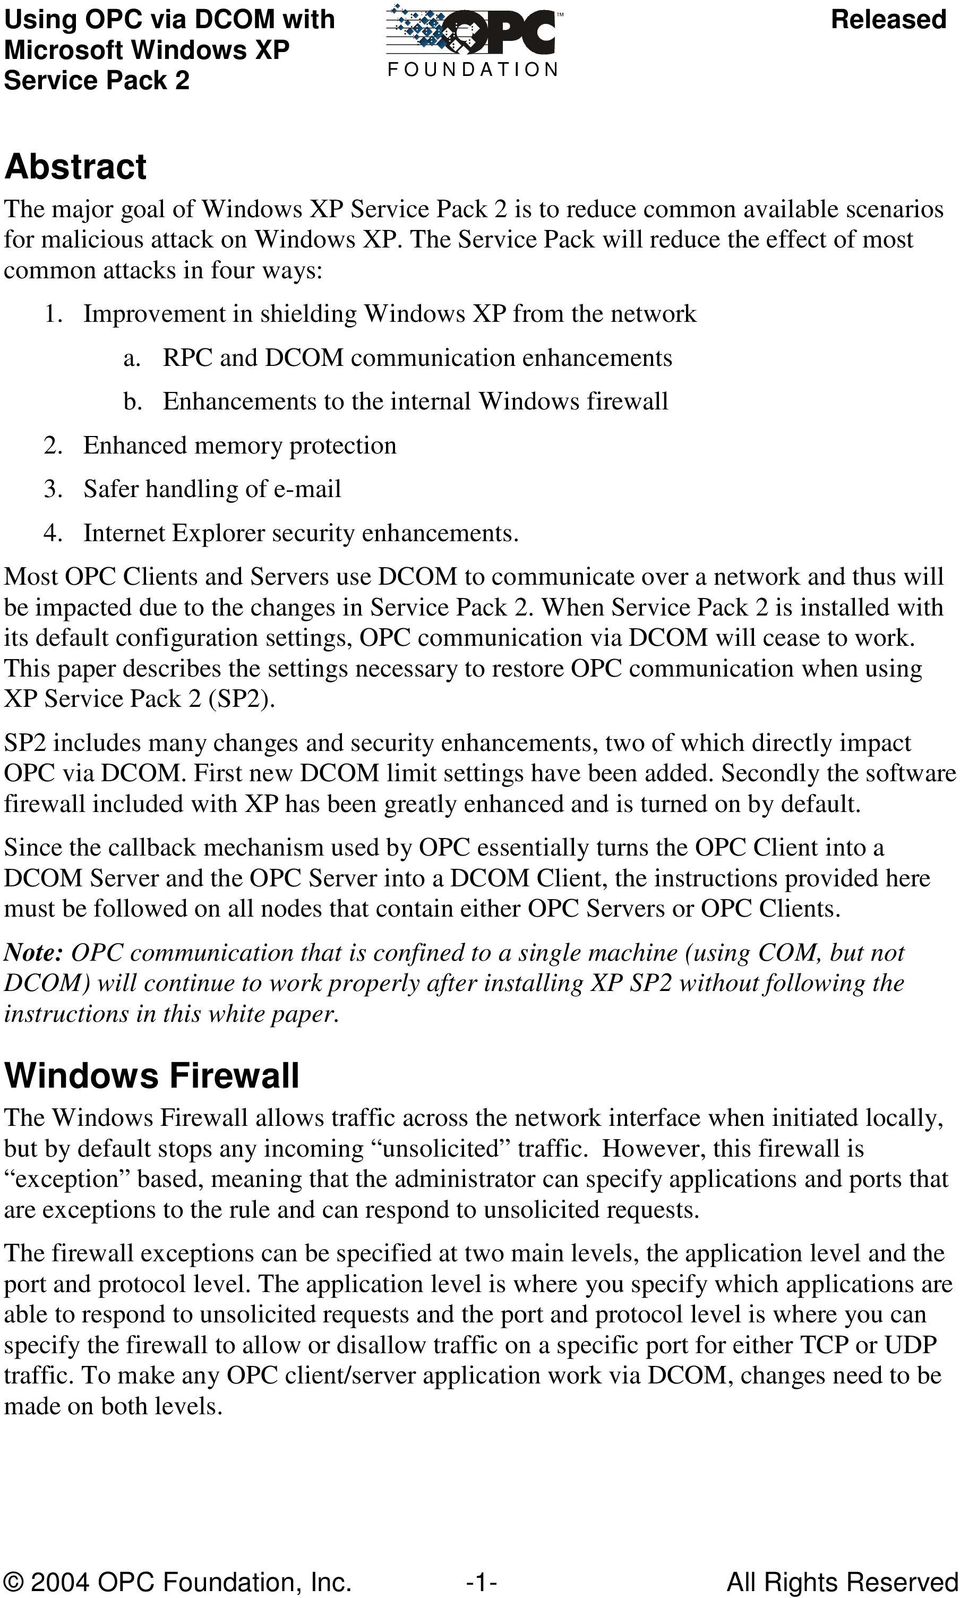 Safer handling of e-mail 4. Internet Explorer security enhancements. Most OPC Clients and Servers use DCOM to communicate over a network and thus will be impacted due to the changes in.